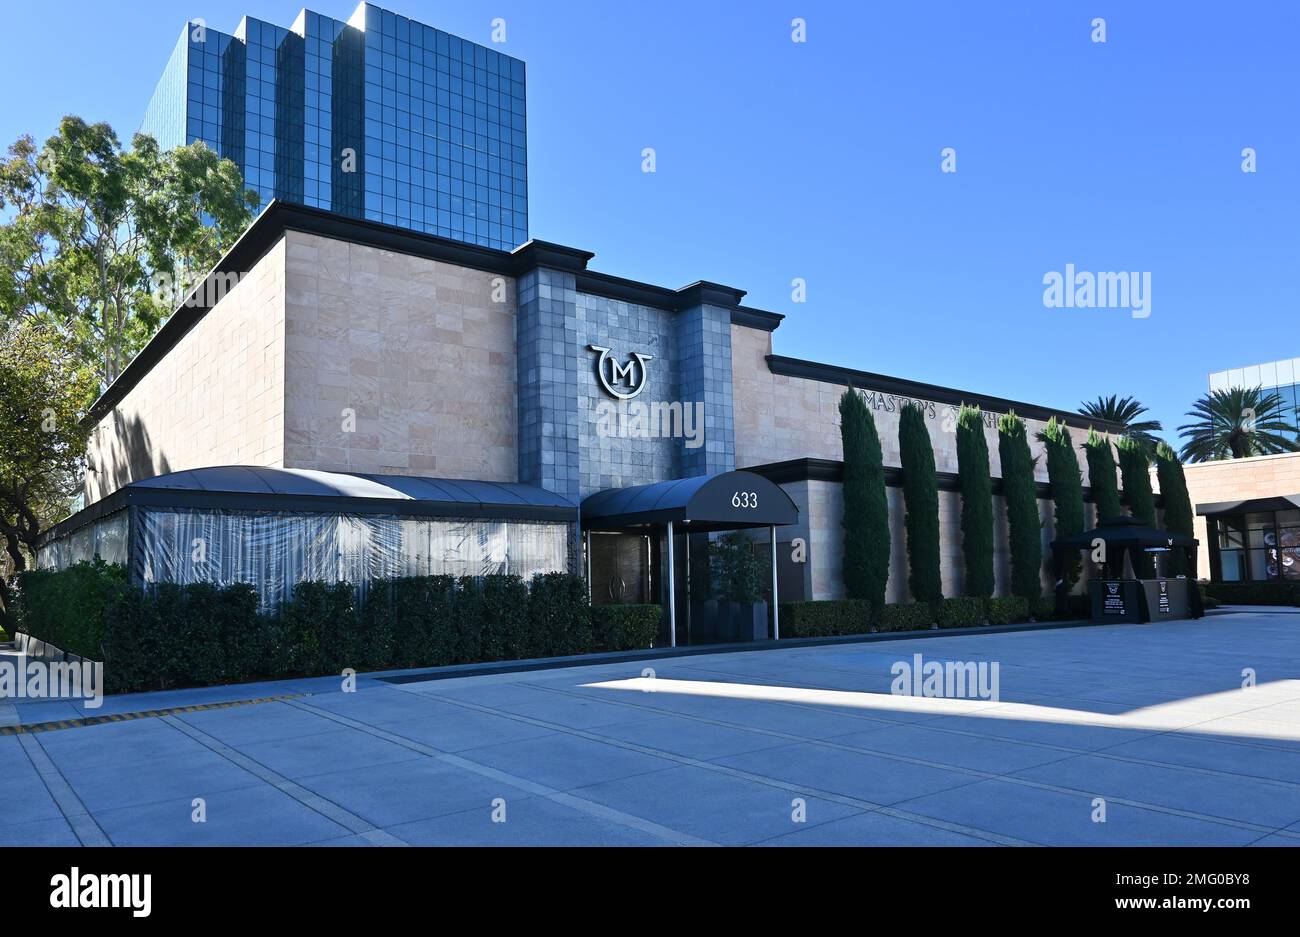 COSTA MESA, CALIFORNIA - 24 JAN 2023: Mastros Steakhouse in the Pacific Arts Plaza, offers exceptional service in a cosmopolitan and entertaining atmo Stock Photo